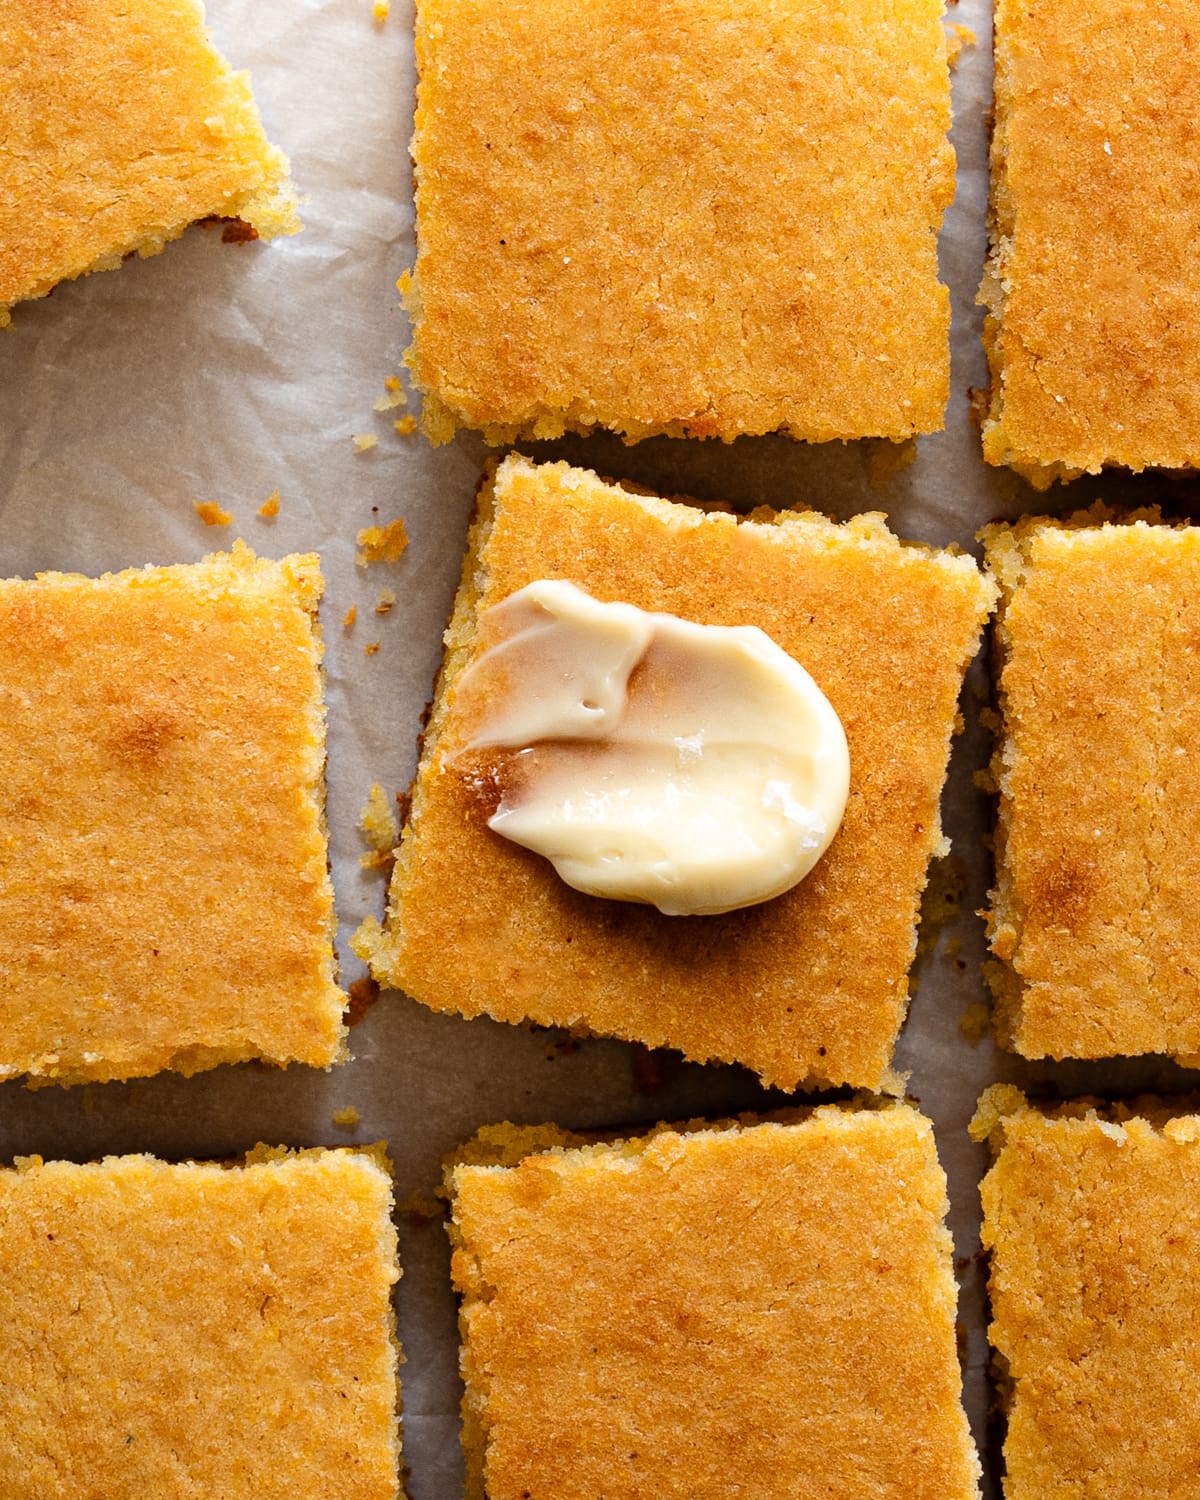 cornbread slices with pat of butter on top.